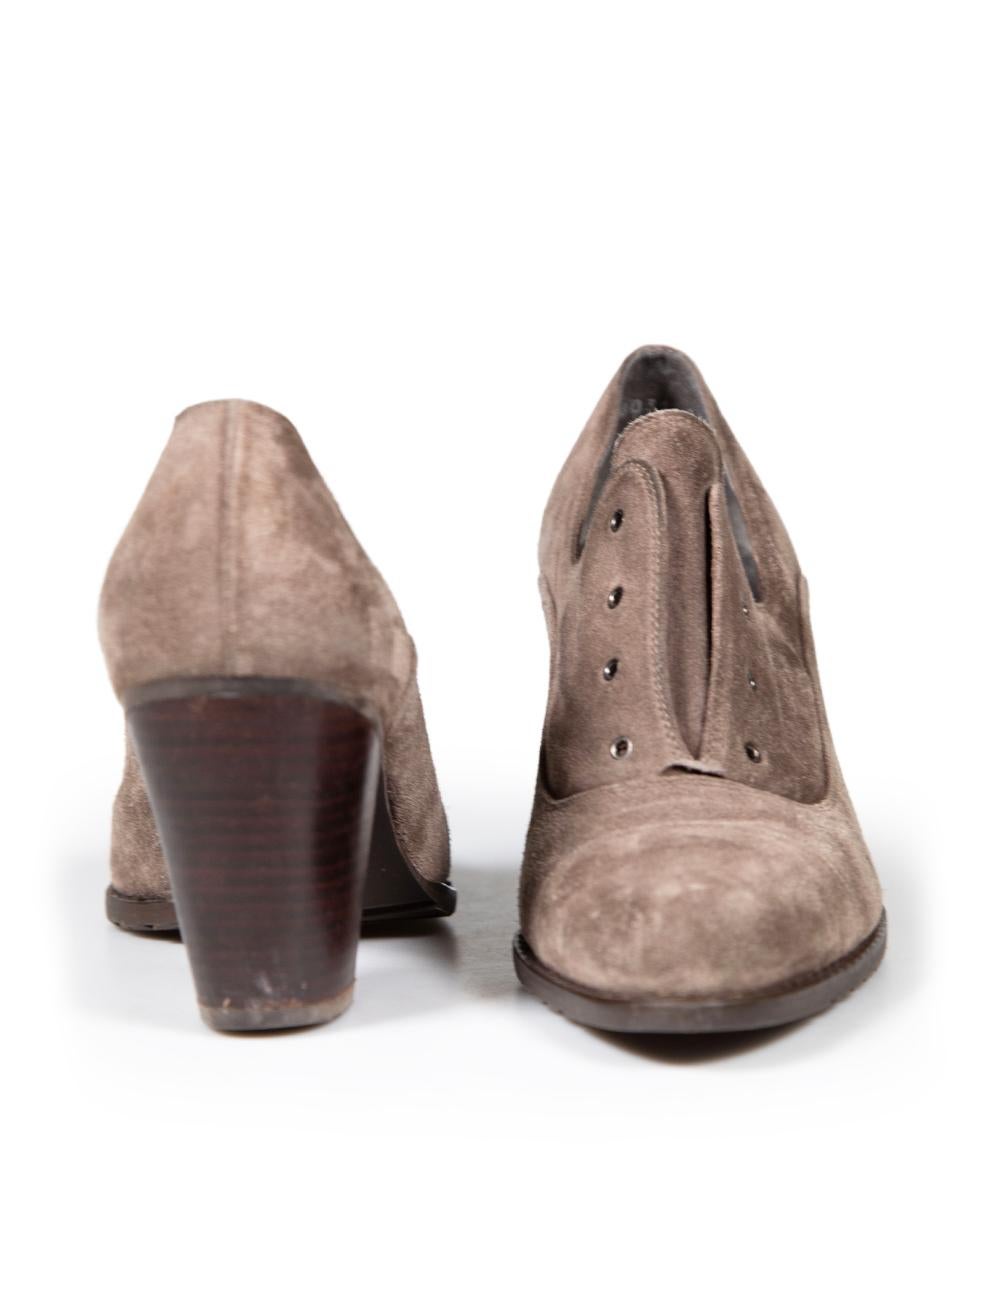 Stuart Weitzman Brown Suede Heels Size US 10 In Good Condition For Sale In London, GB